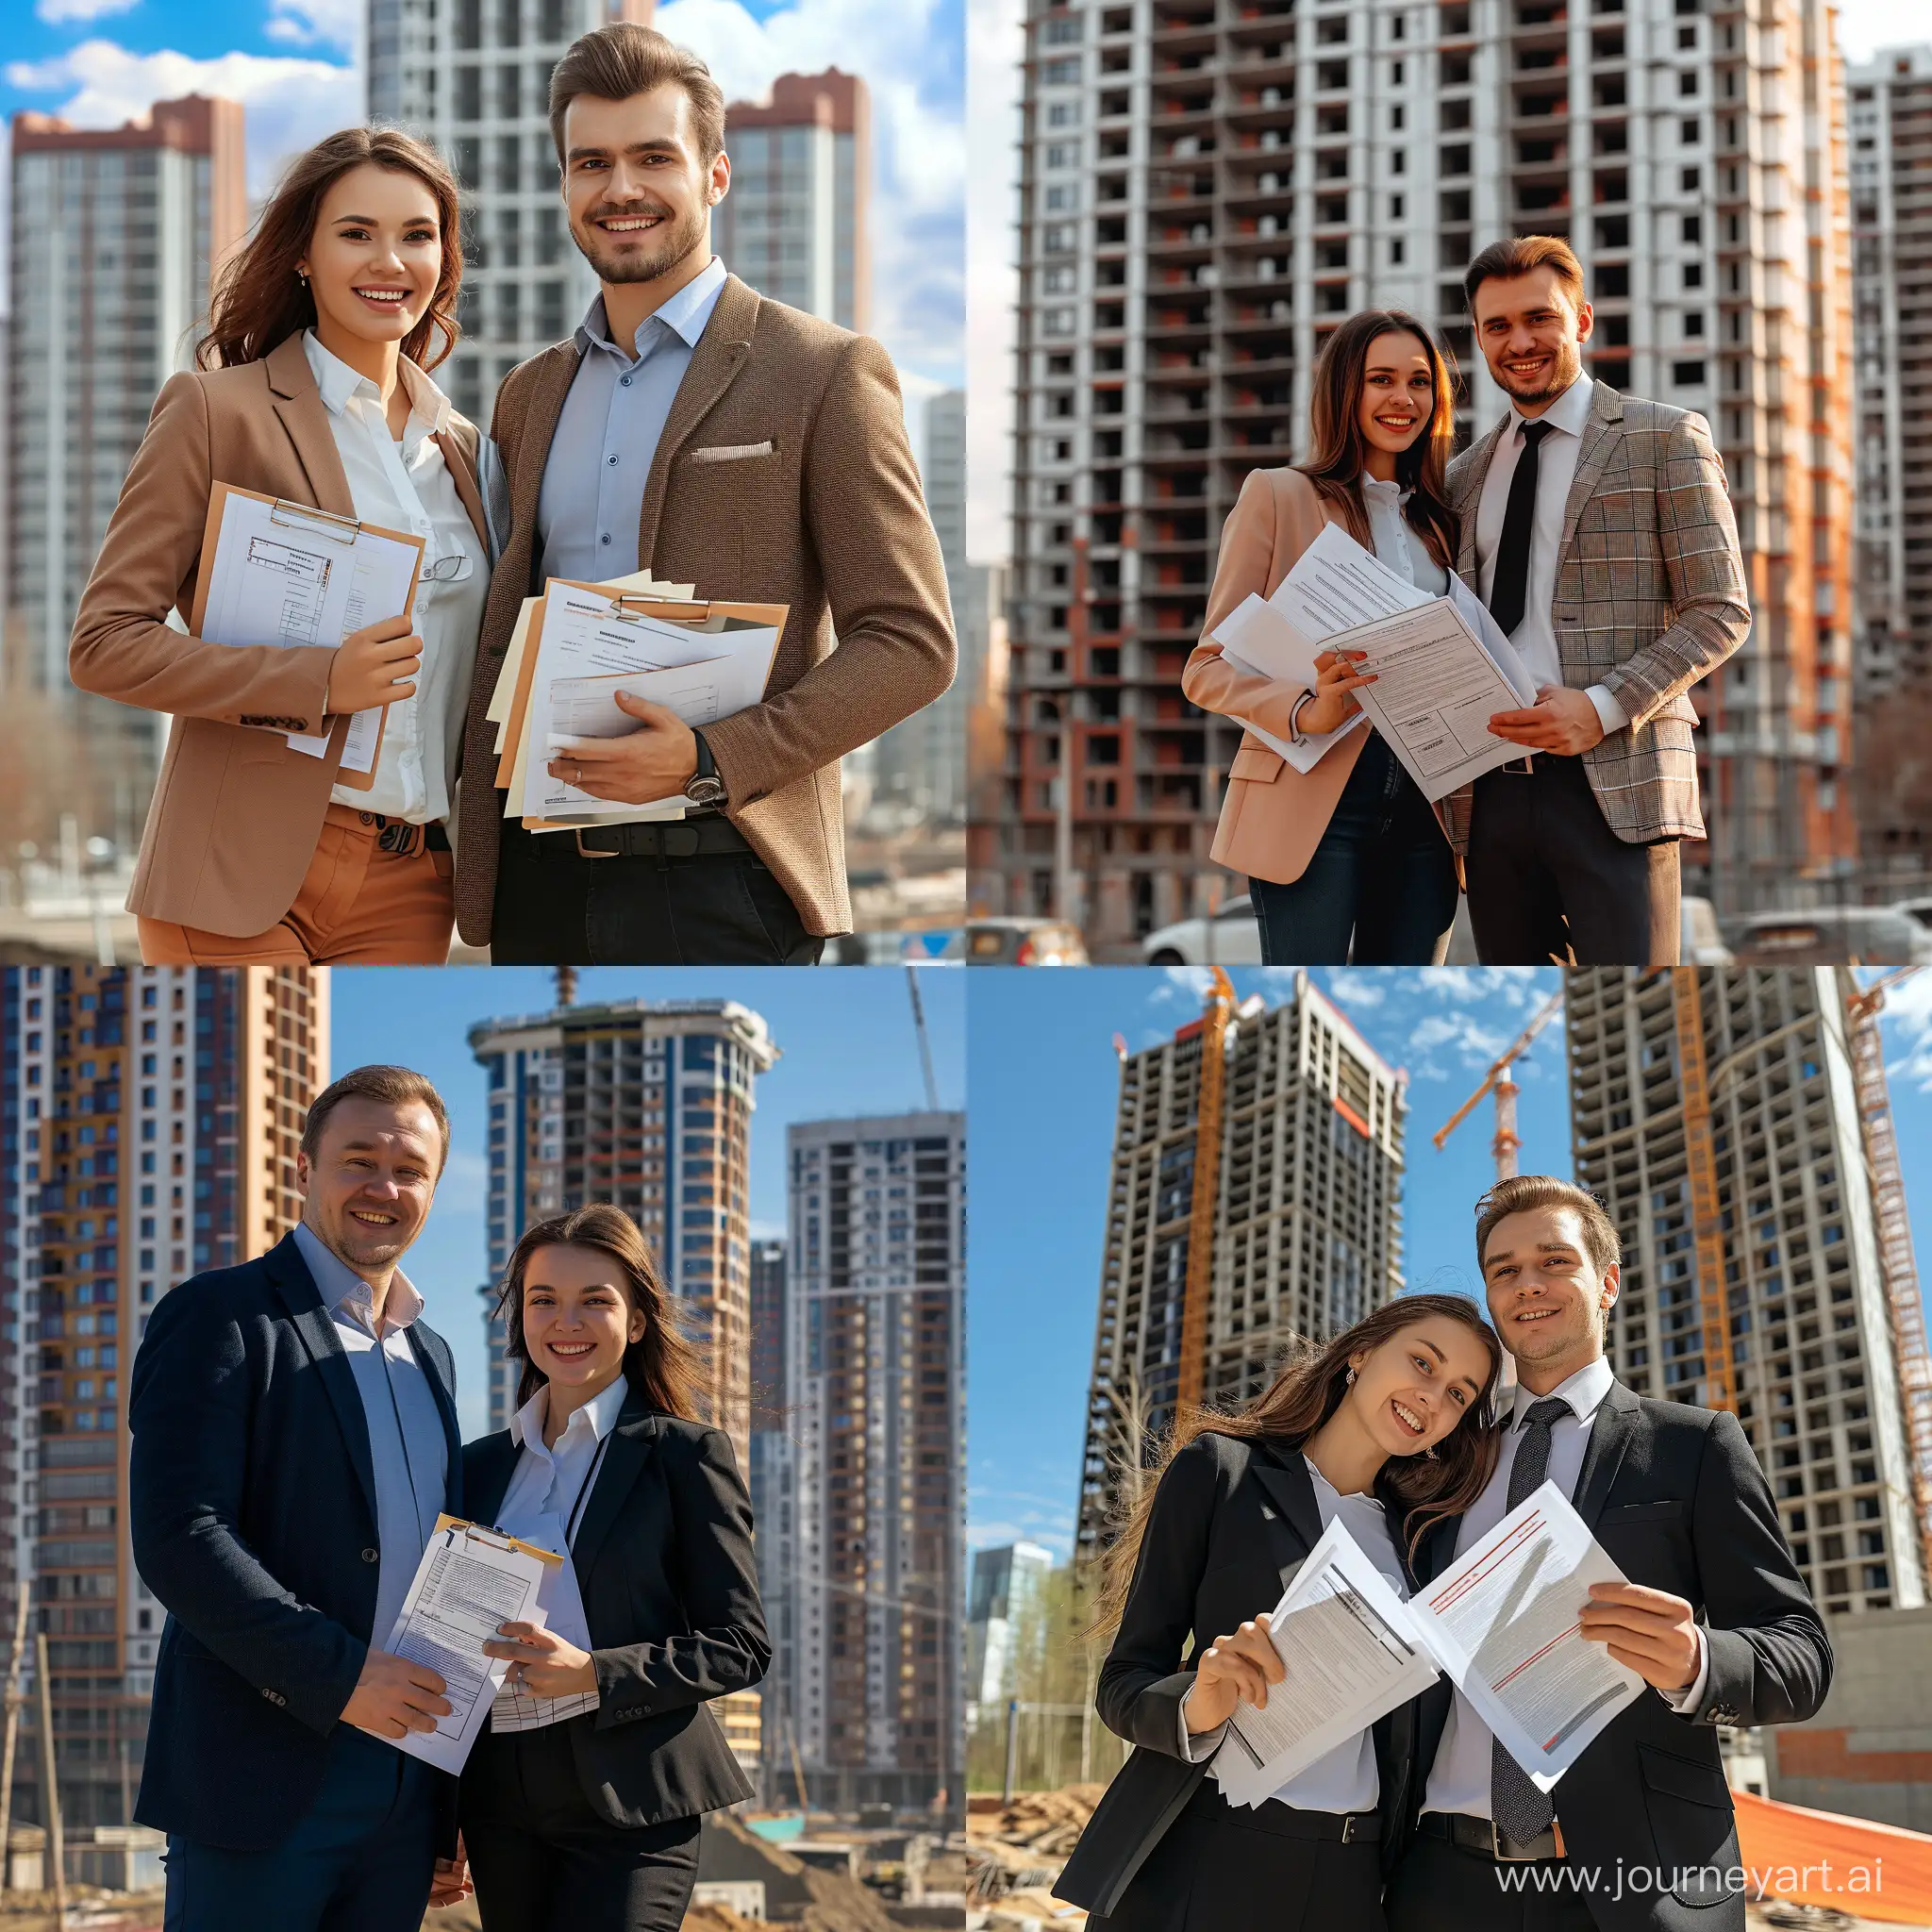 Smiling-Realtor-Couple-with-Documents-in-Hand-Surrounded-by-New-Buildings-in-Tyumen